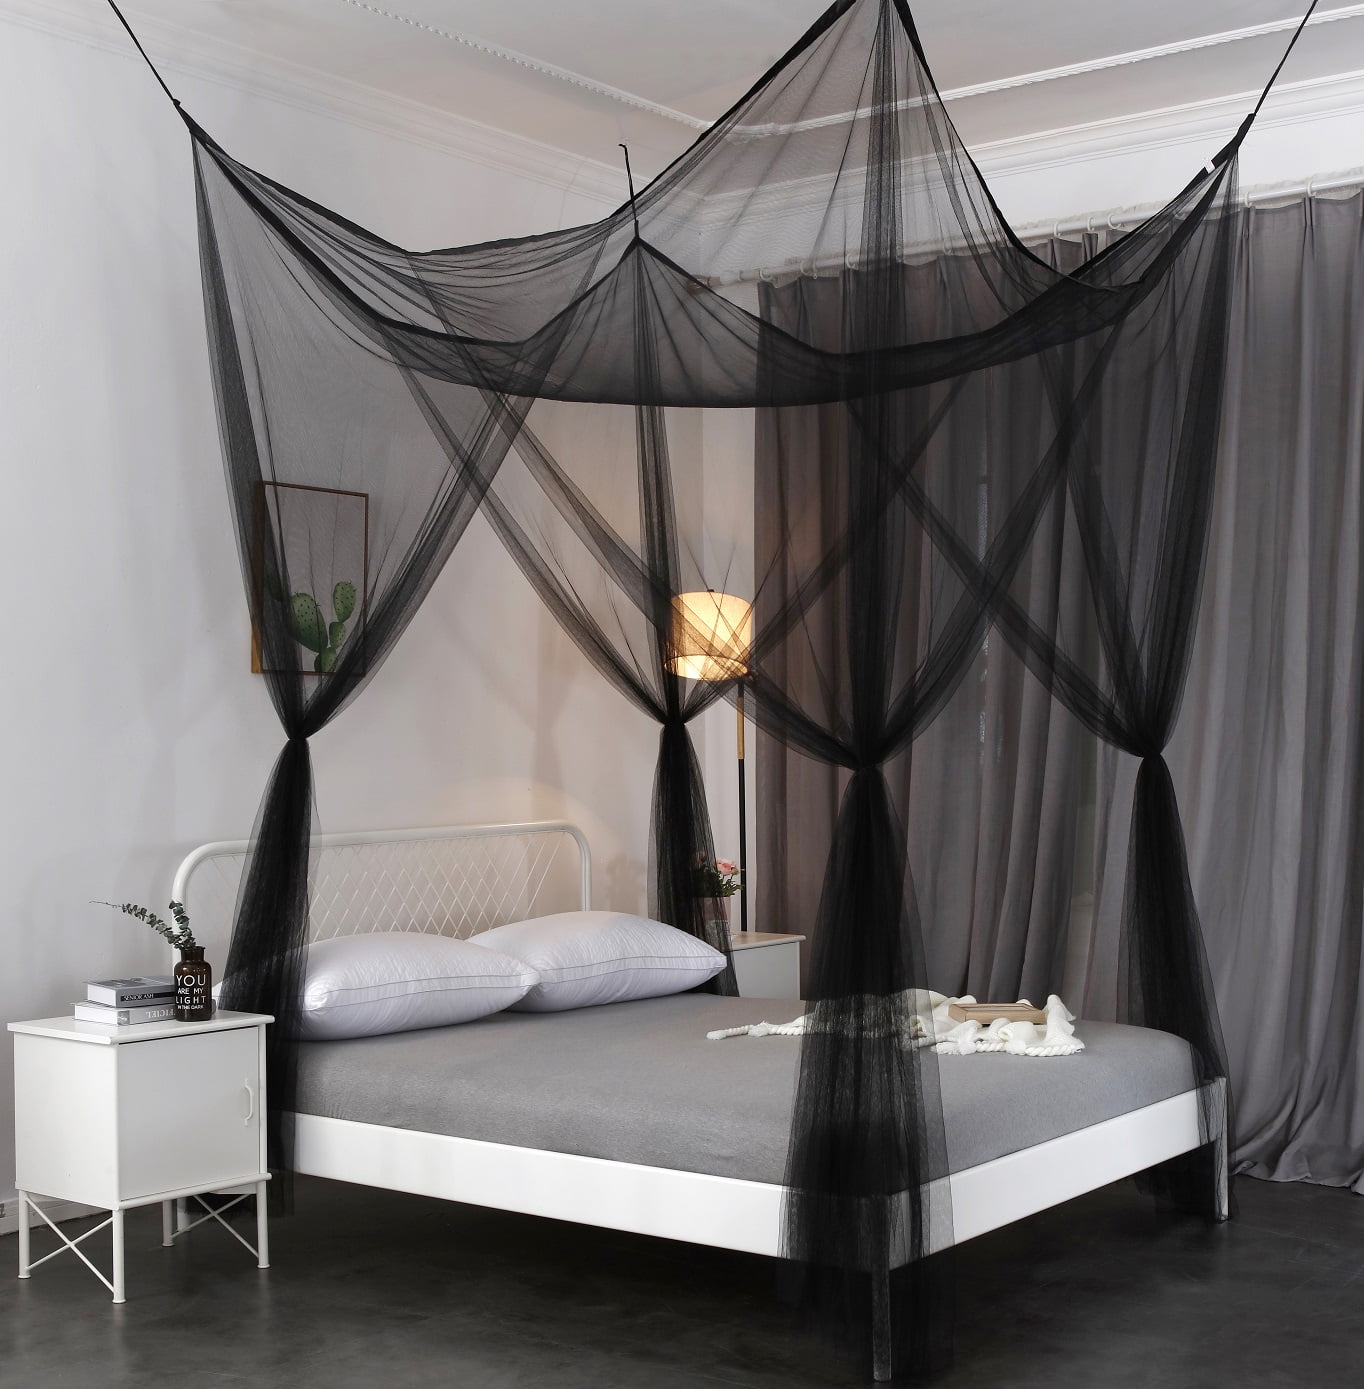 4 Corner Post Bed Canopy Mosquito Net Netting Bedding Lace Queen/King Bed 3Color 